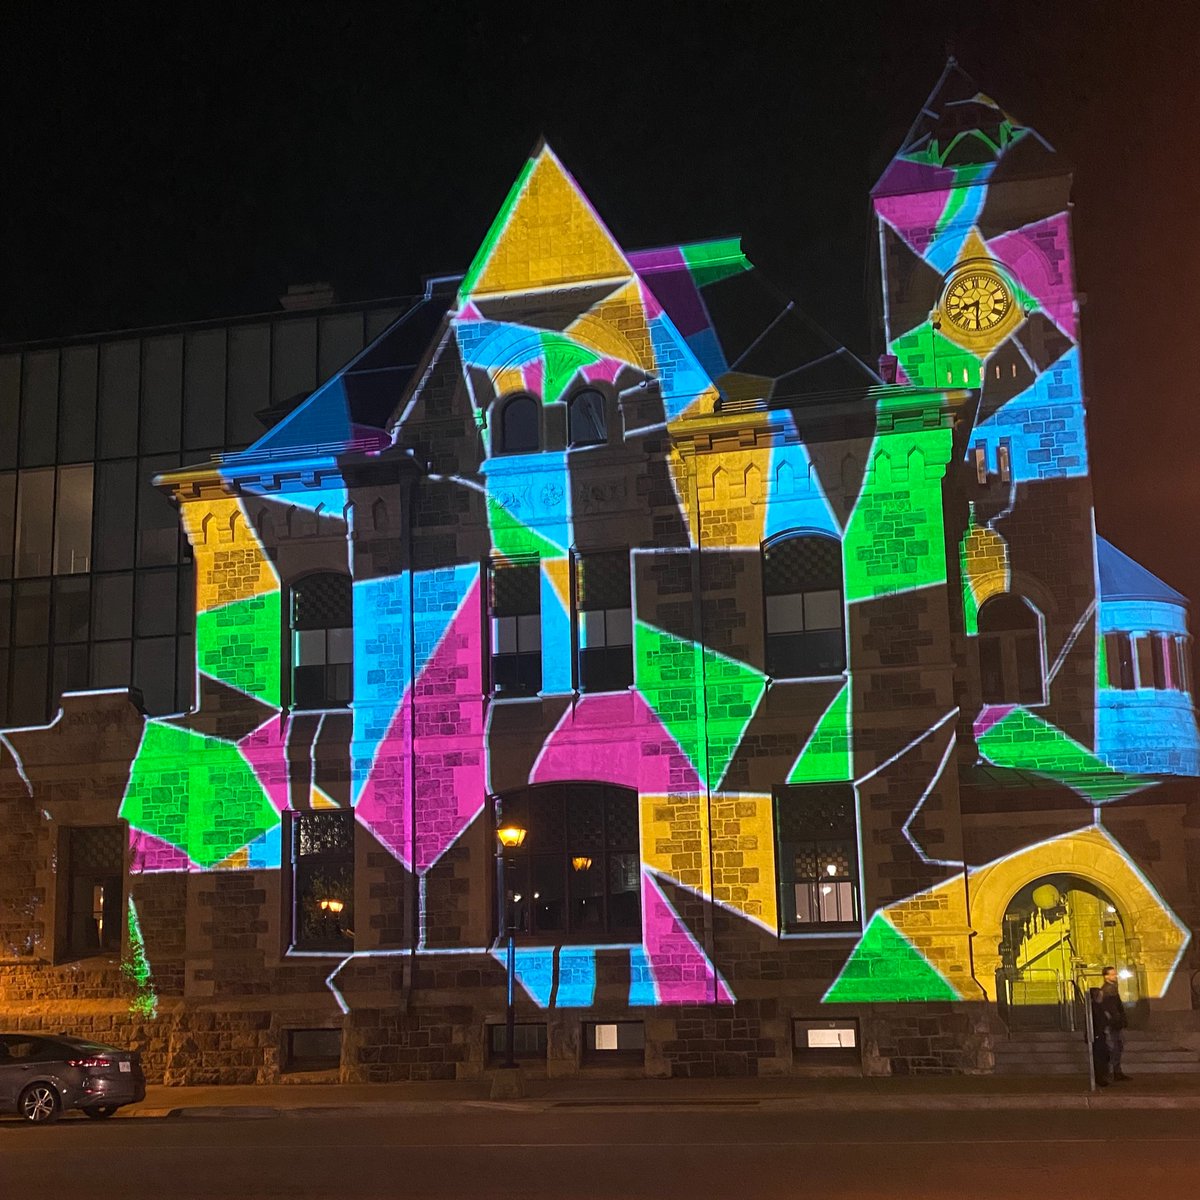 While you're out and about this long weekend, stop by the Old Post Office to see the spring digital projection show! Check it out Thurs-Sun every week, starting at 8:00pm. Learn more: cambridge.ca/publicart